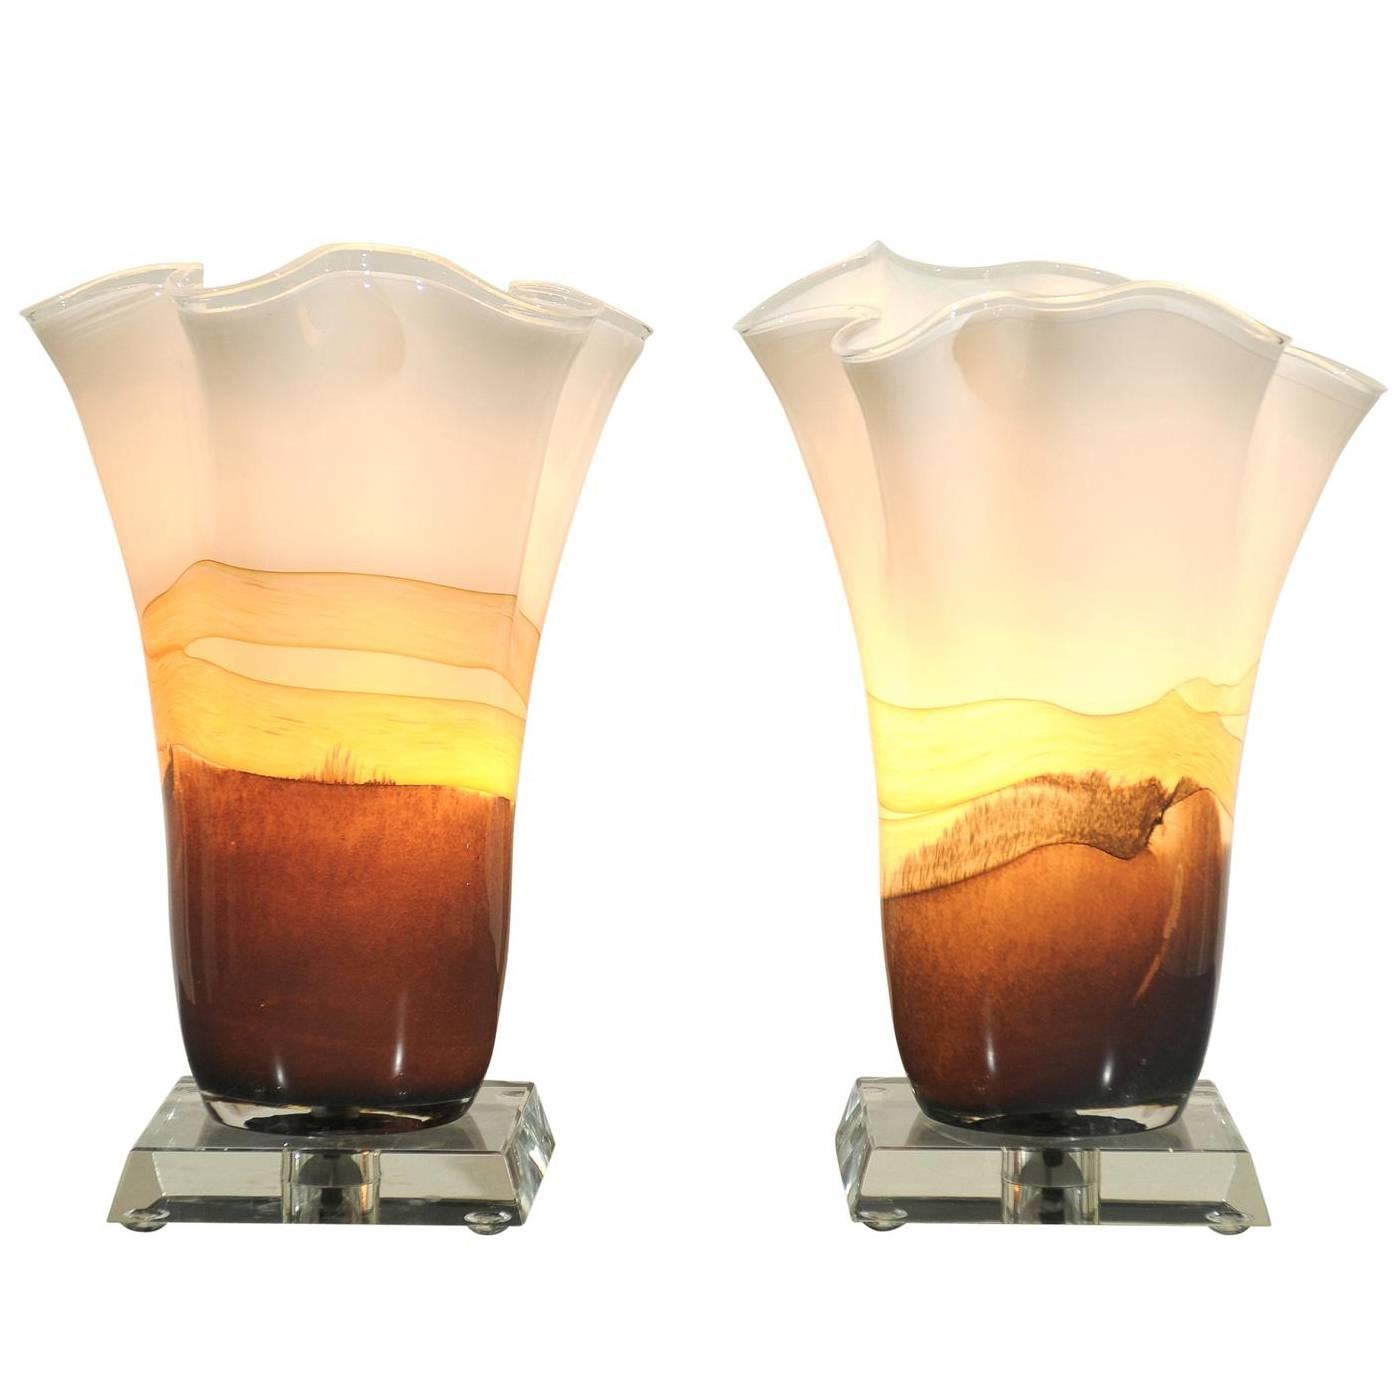 Incredible Pair of Blown Glass Table Torchieres in Cream and Caramel For Sale